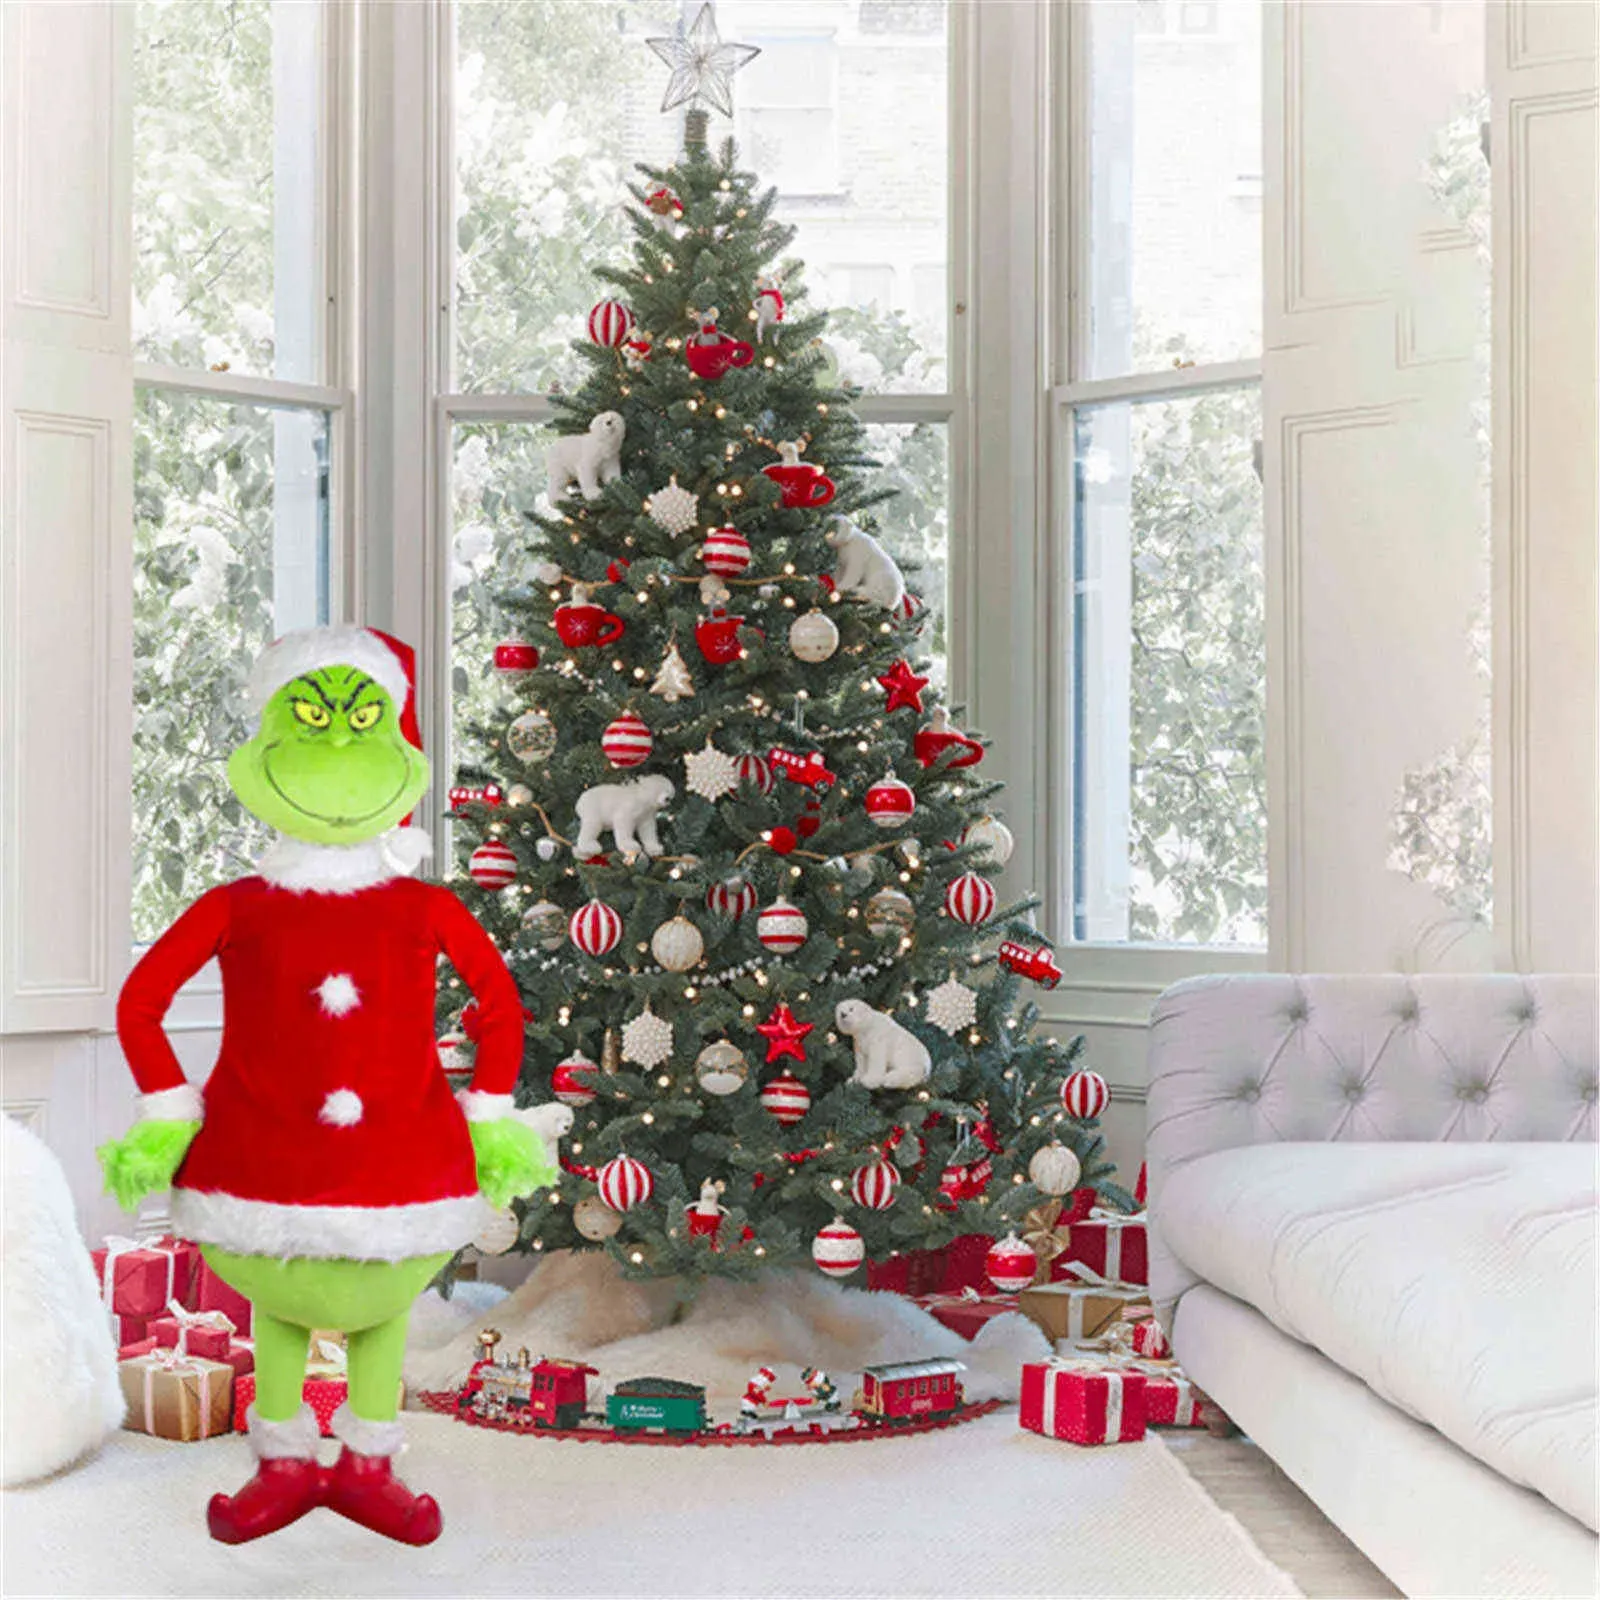 Fast Delivery Realistic Animated Grinch Christmas Ornament Christmas Tree Room Decoration 2020 Doll Gift Decoracin navidea G0911